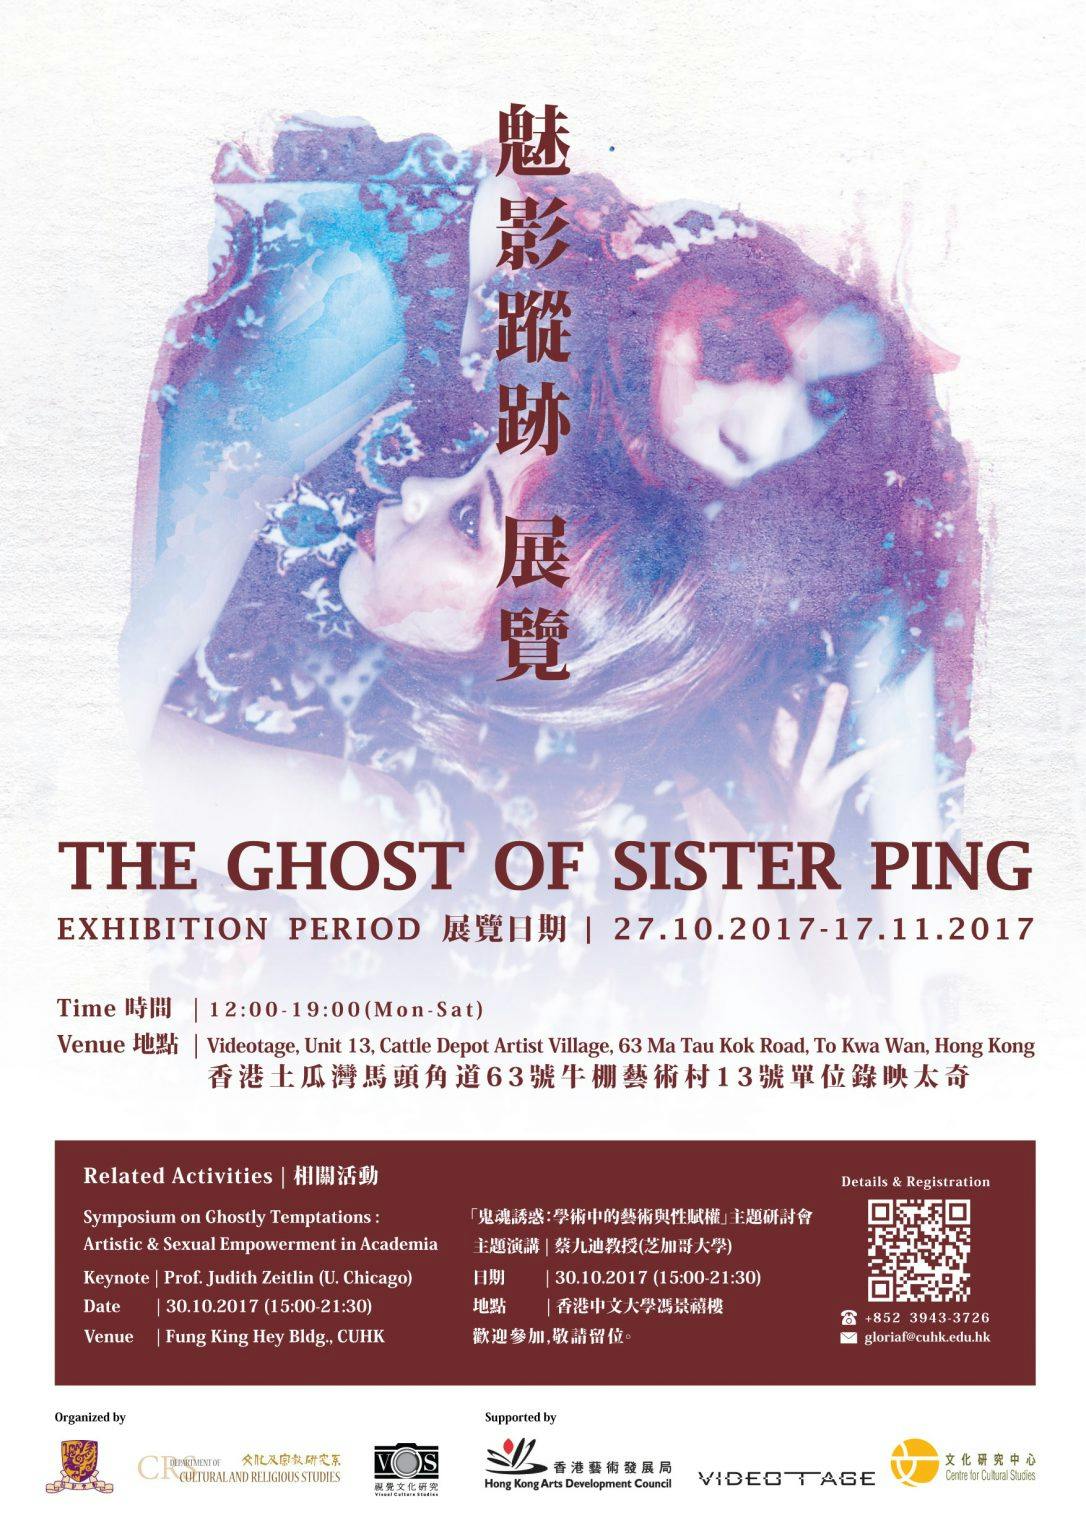 The Ghost of Sister Ping 魅影蹤跡